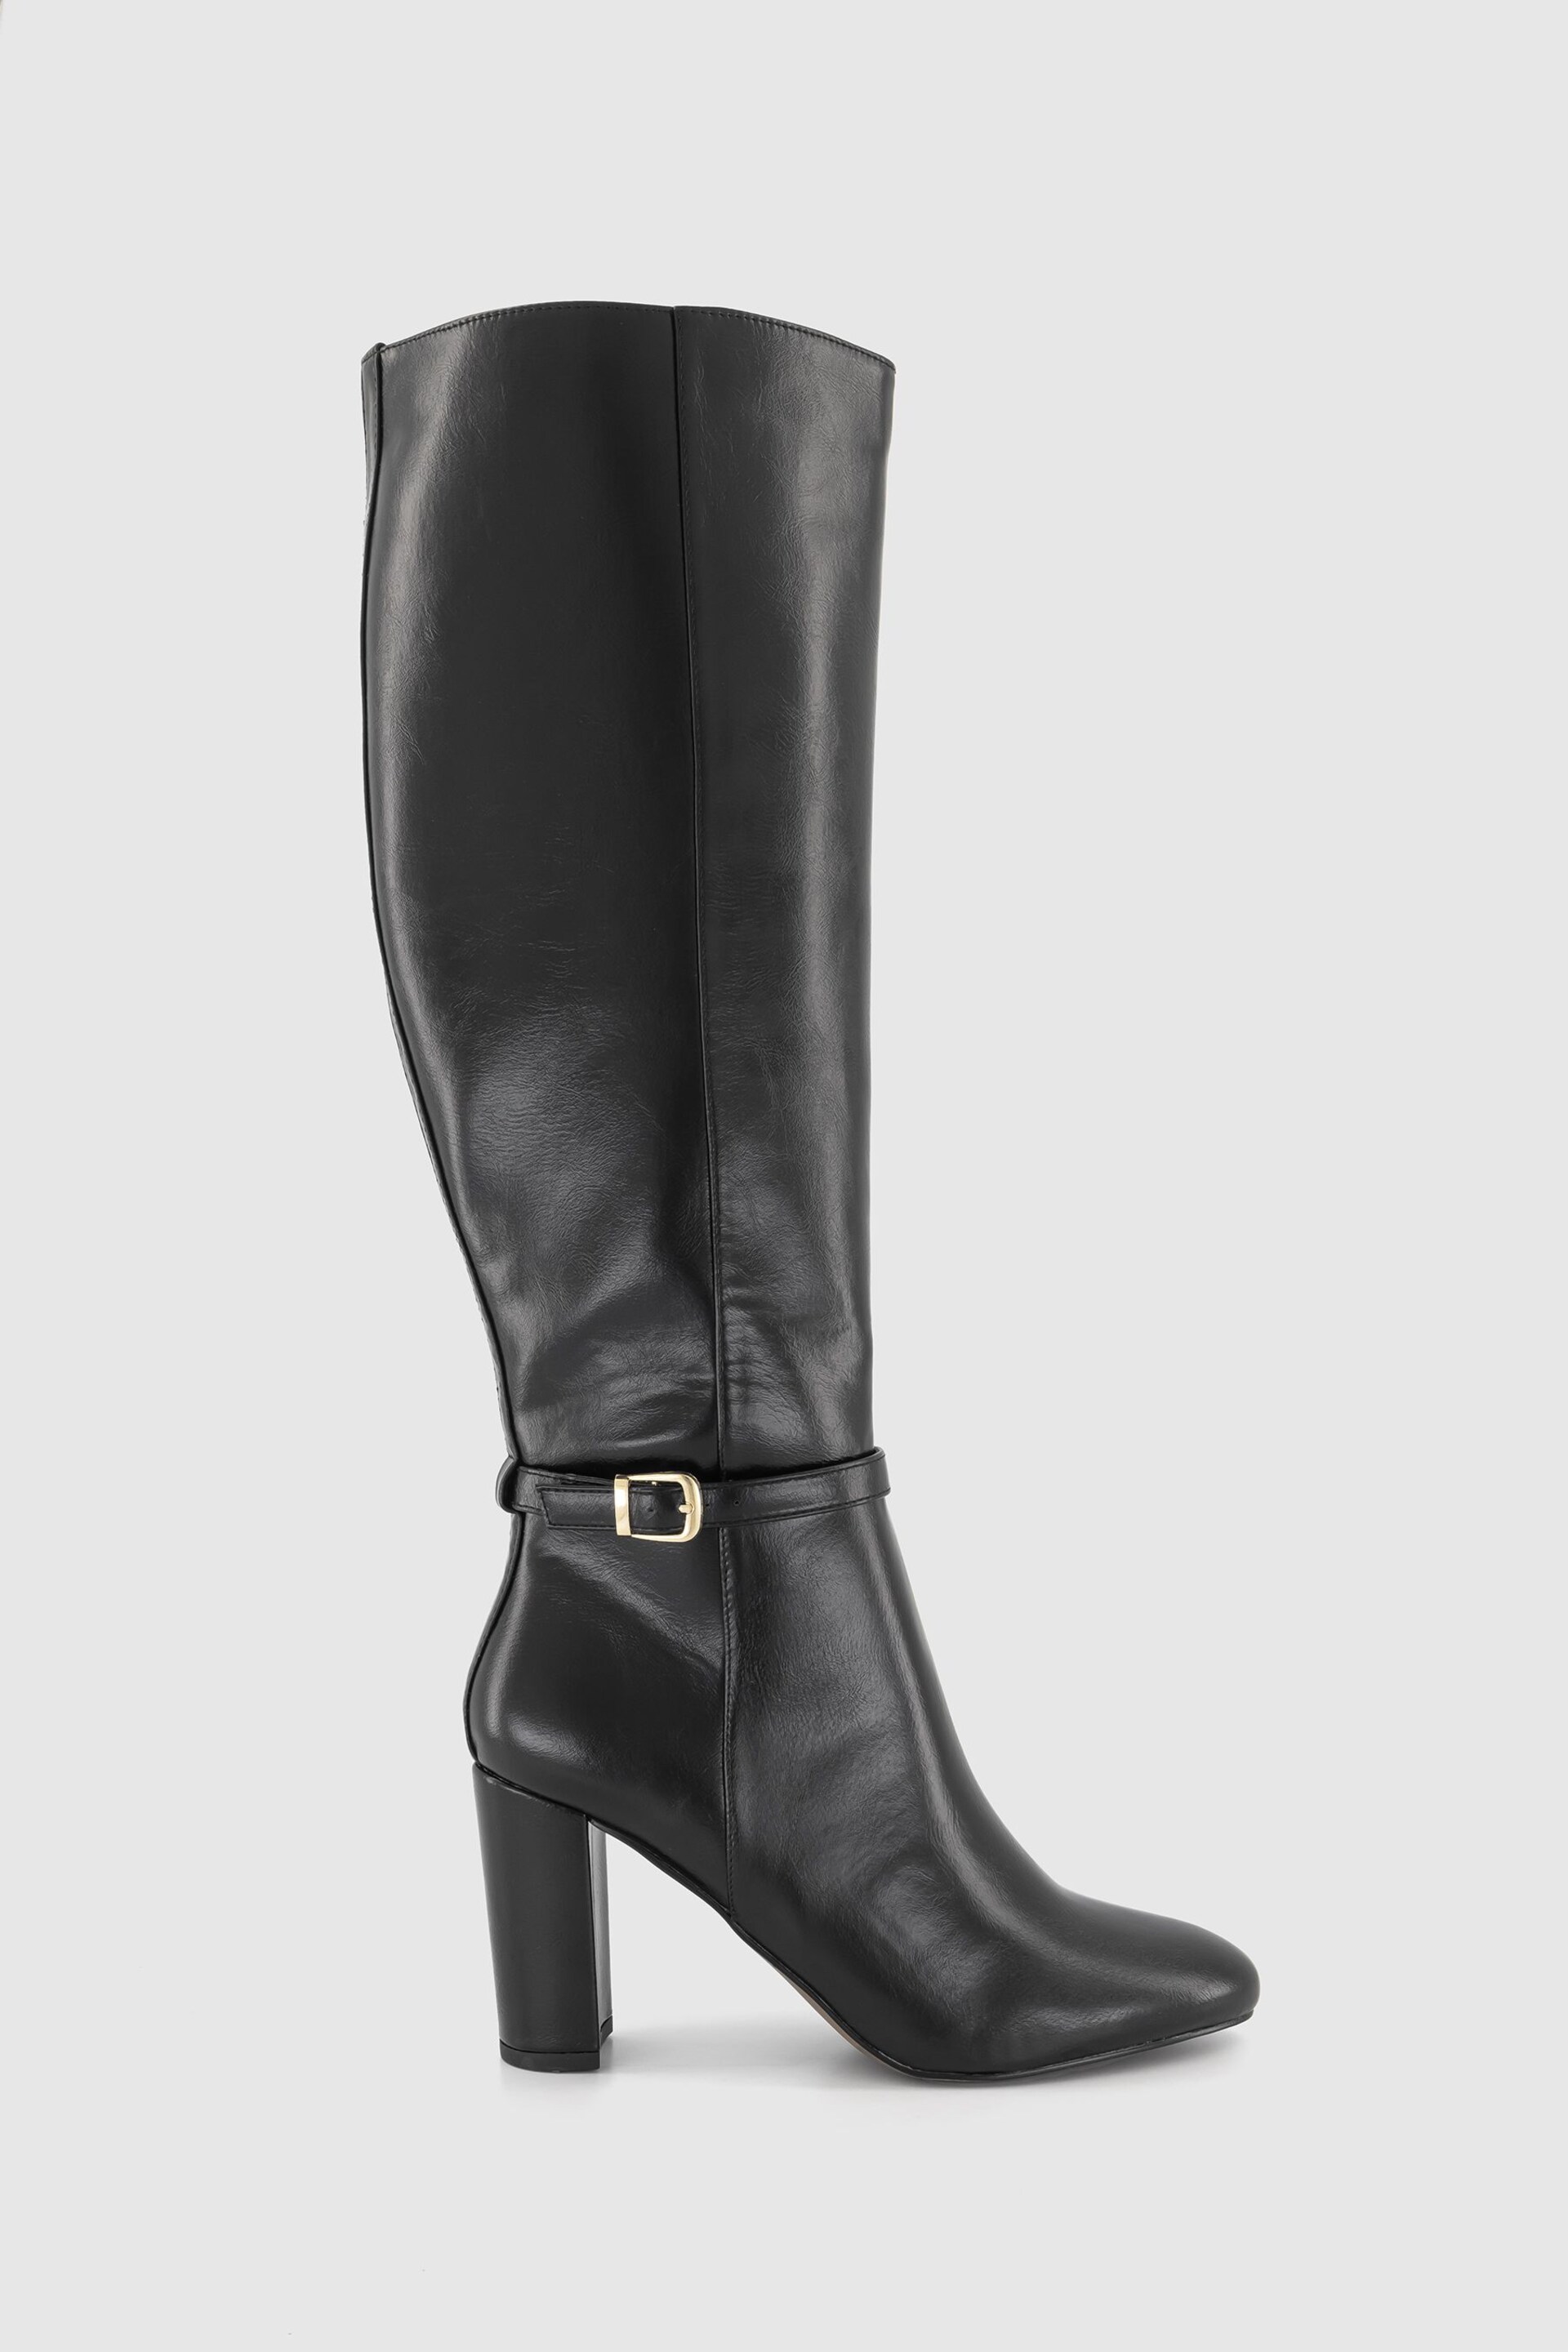 Office Black Block Heel High Leg Boot With Buckle Detail - Image 2 of 4